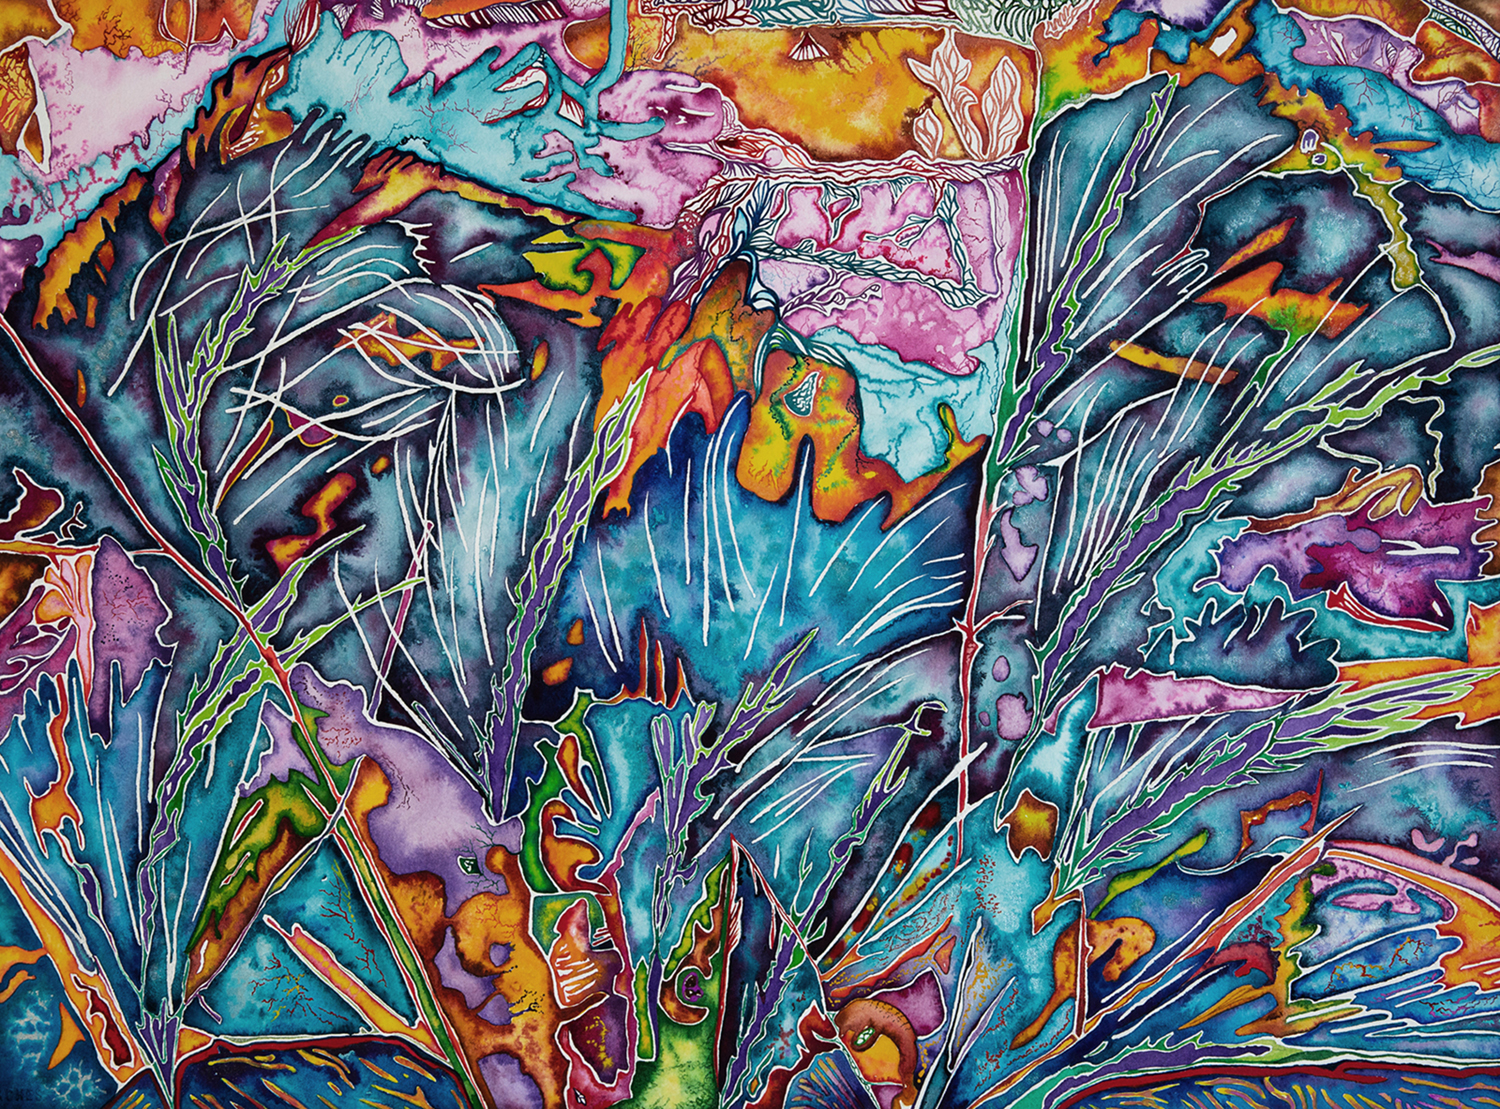 Brightly colored abstract painting with organic pine needle-like impressions. Image courtesy of Susan Andrews